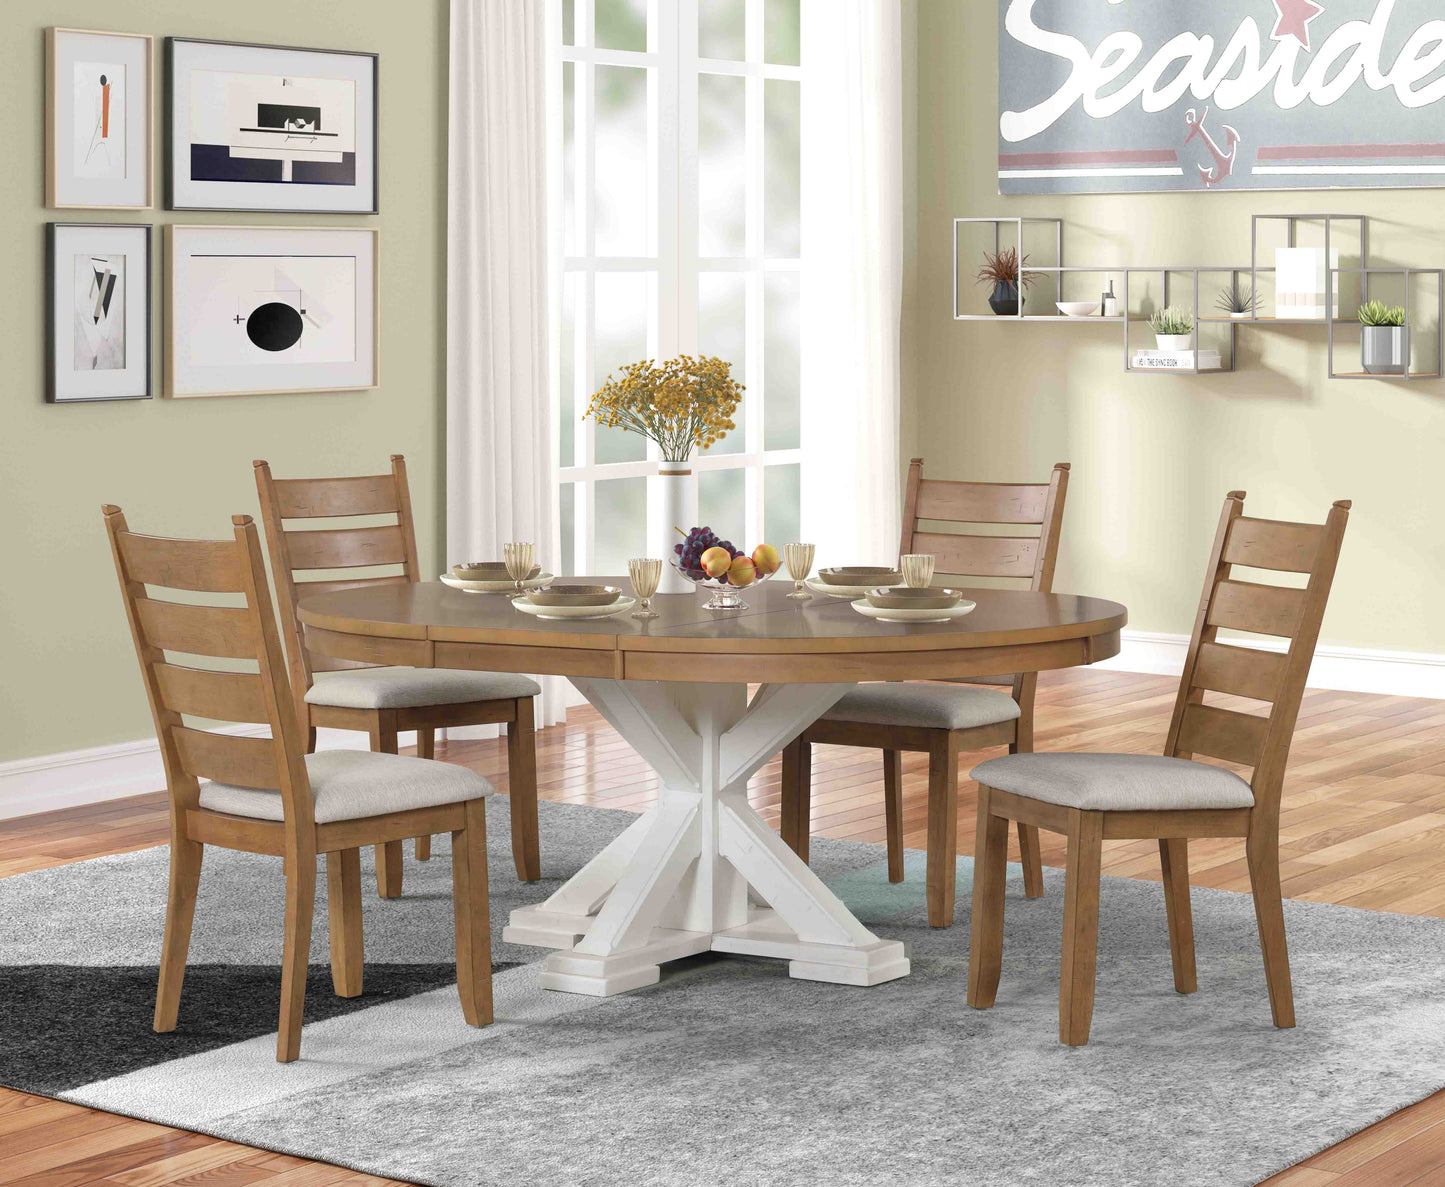 Trina 5 Piece Round/Oval Dining Set with Natural Top and Natural Chairs